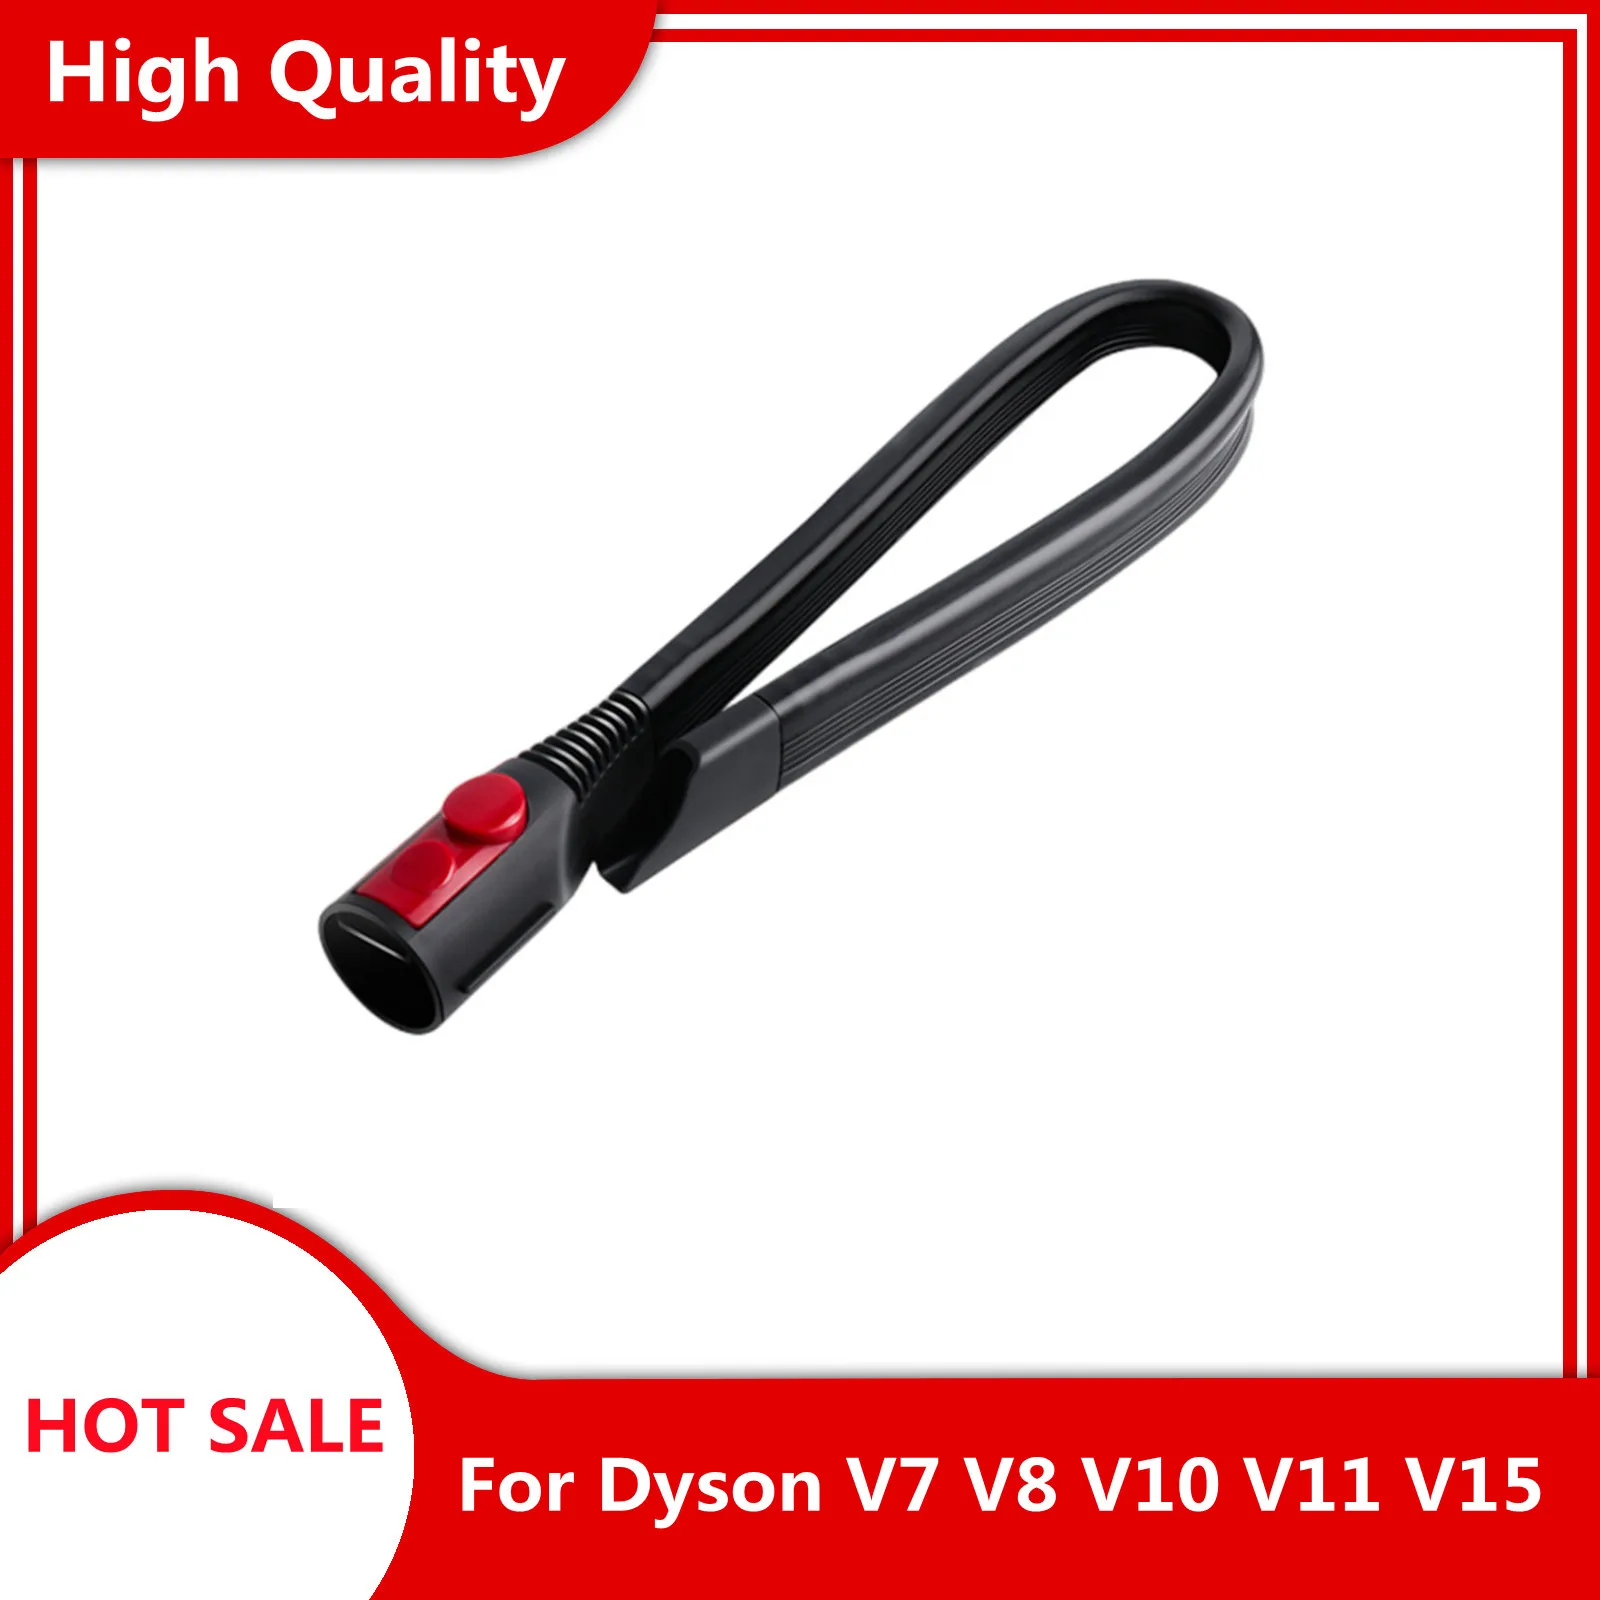 Suitable for Corners and Gaps Cleaning Flexible Crevice Tool for Dyson Cordless Vacuum Cleaners V7 V8 V10 V11 V15 soldering station welding repair third hand multifunctional welding tool pcb holder flexible 4 arm alloy stand